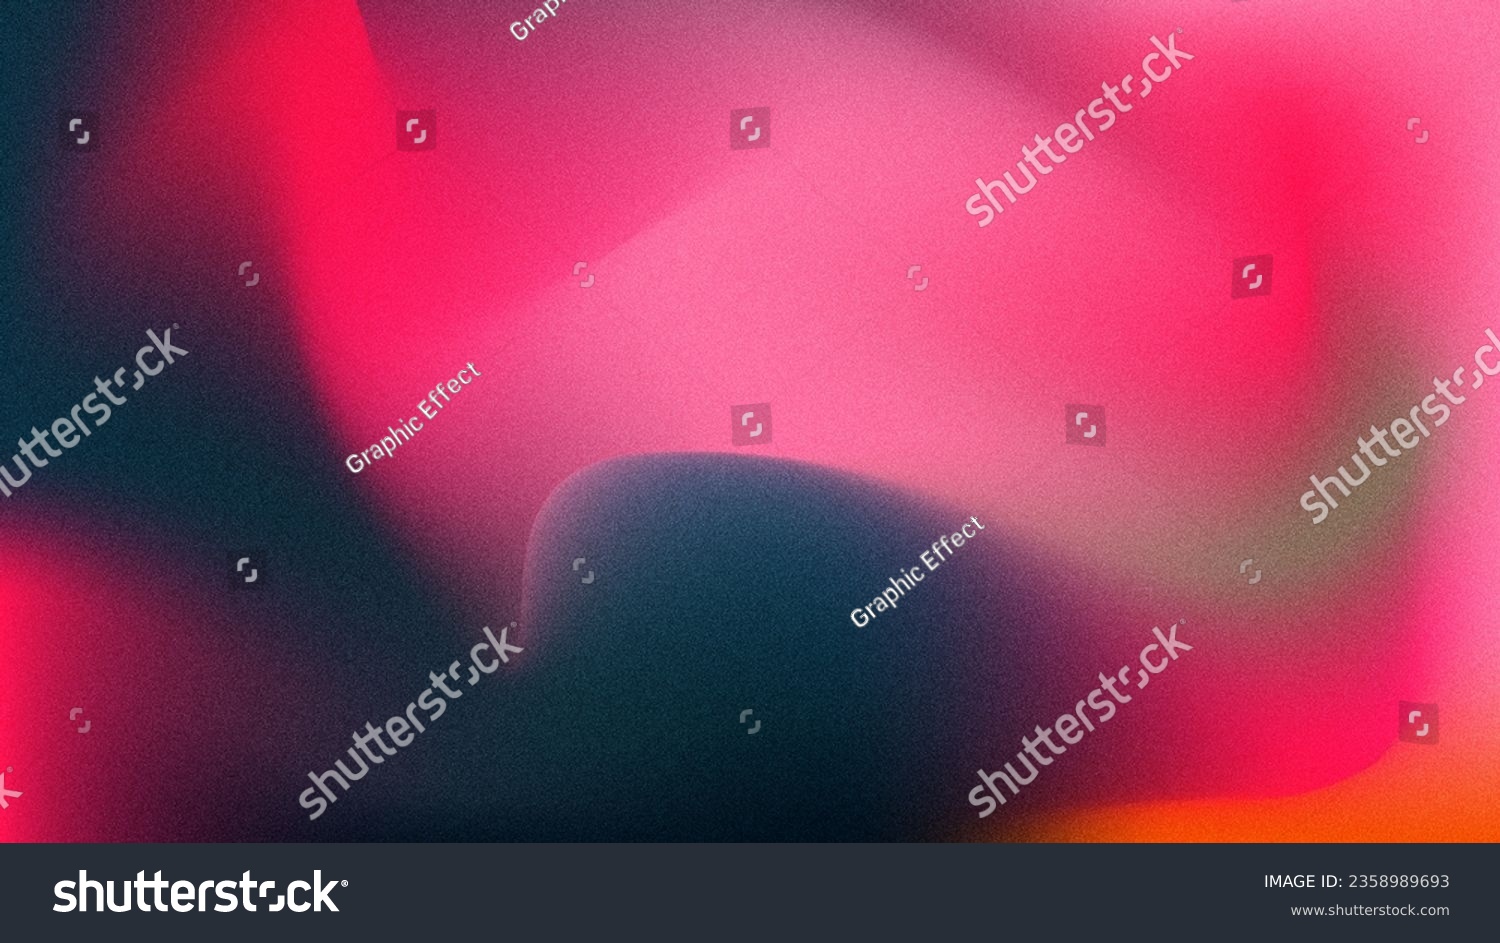 grainy warm gradient with noise orange black purple red blue colors banner poster cover abstract background design. gradient grain noise effect for social media, trendy Warm tone, and vintage style #2358989693